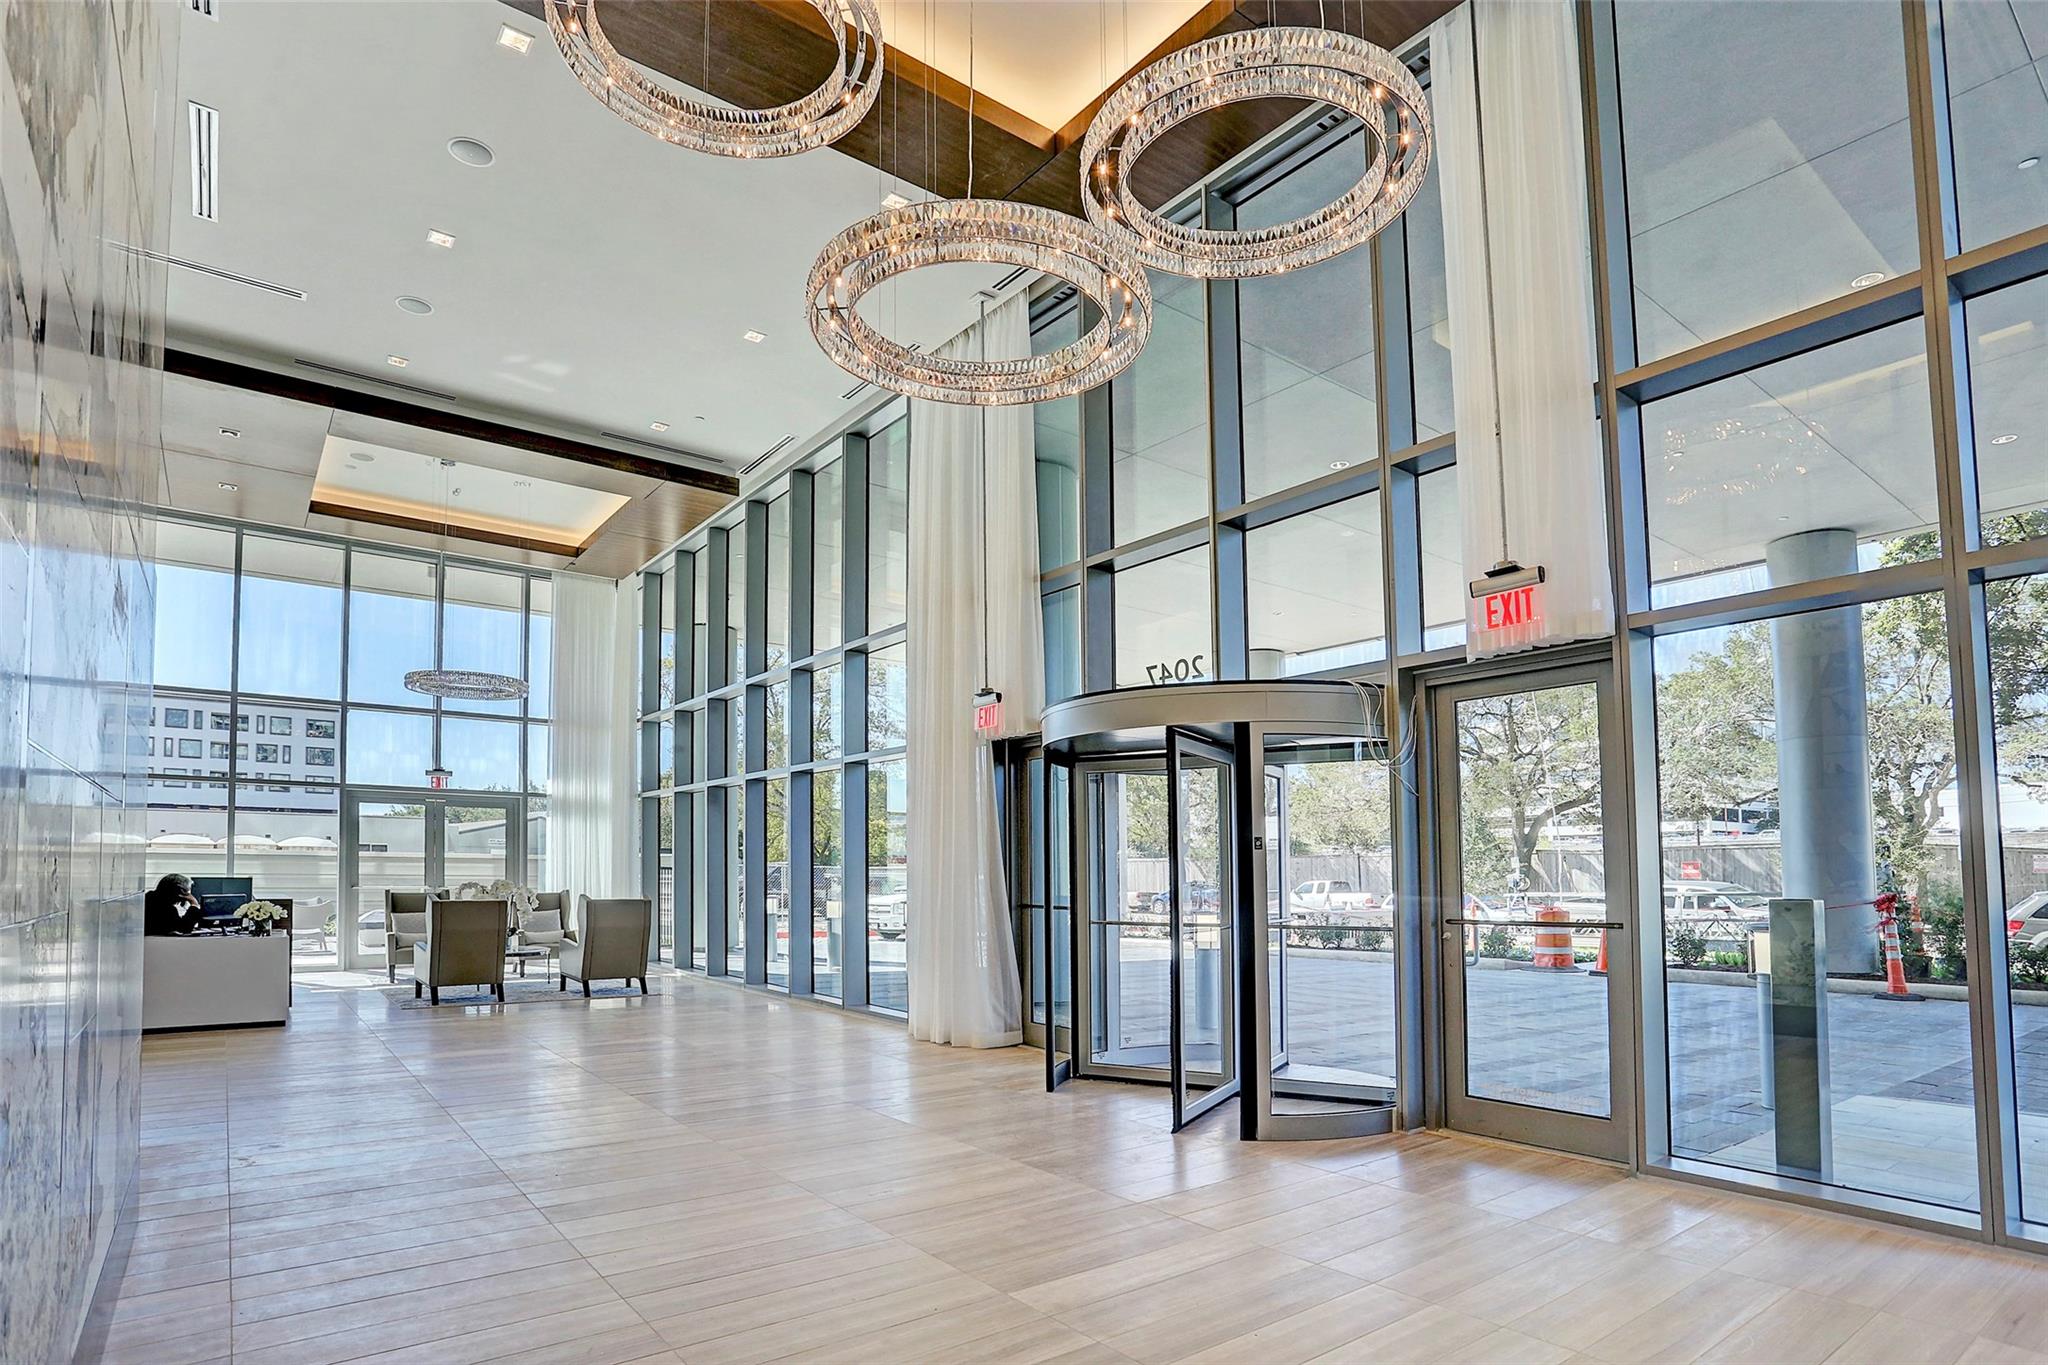 Gorgeously immaculate lobby with crystal chandeliers, floor to ceiling walls of glass, and decorative marble walls. The building offers 24-hour concierge services and valet parking. - If you have additional questions regarding 2047 Westcreek Lane  in Houston or would like to tour the property with us call 800-660-1022 and reference MLS# 10209475.